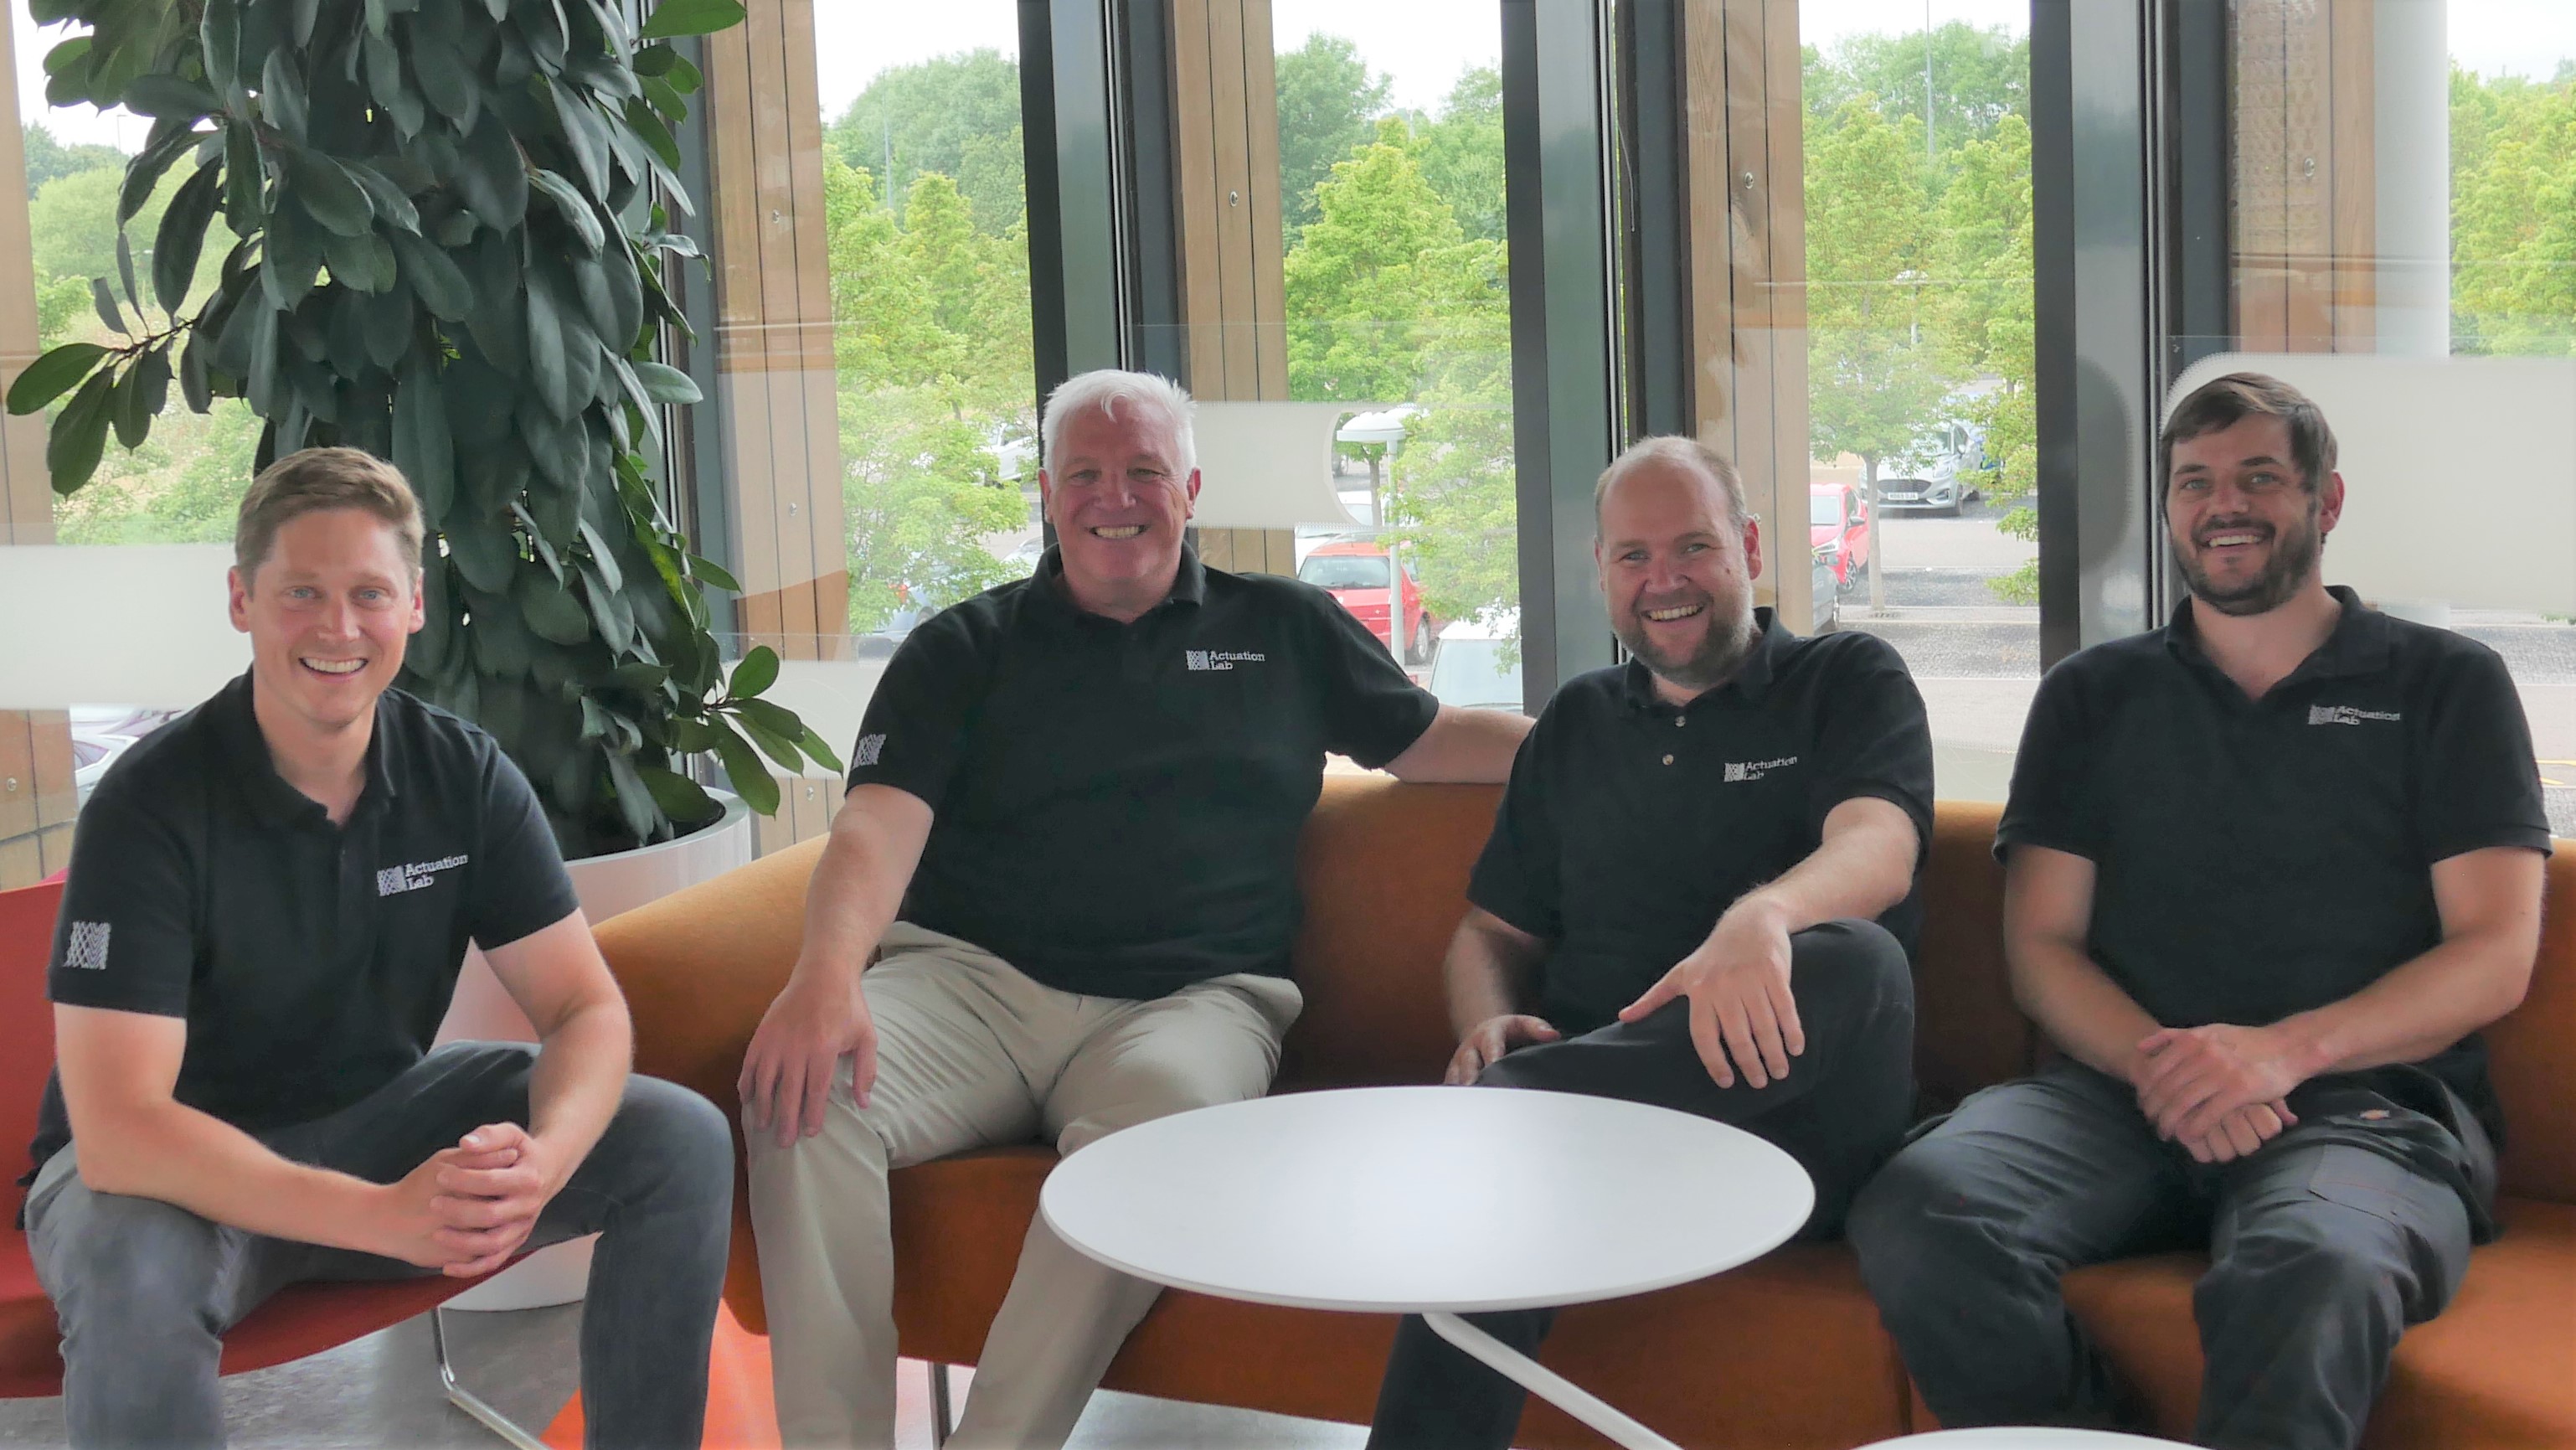 From left to right: CEO Simon Bates, Business Development Associate Rob Boycott, CTO Michael Dicker and Head of R&D Tom Llewellyn-Jones